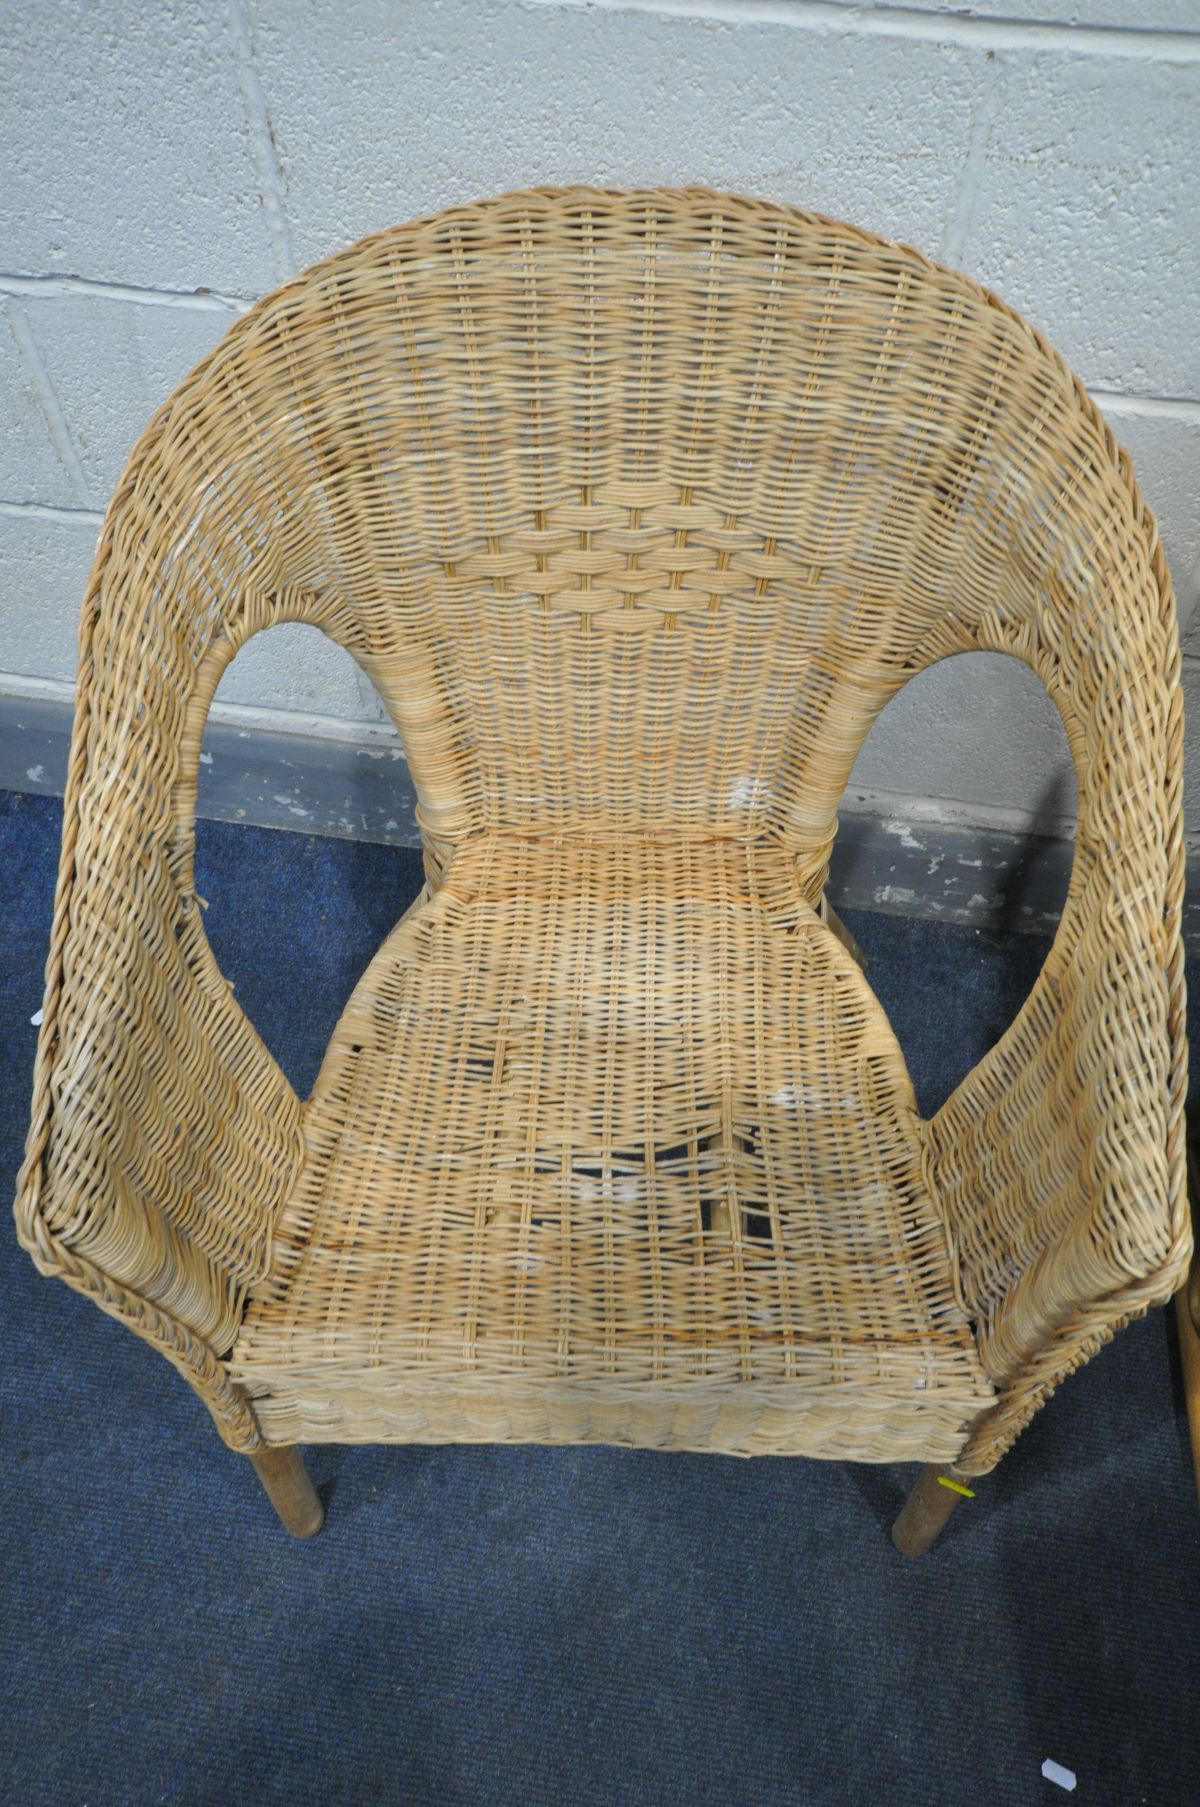 A PAIR OF WICKER ARMCHAIRS, with beige and floral upholstery, and another wicker armchair (Sd to - Image 2 of 2